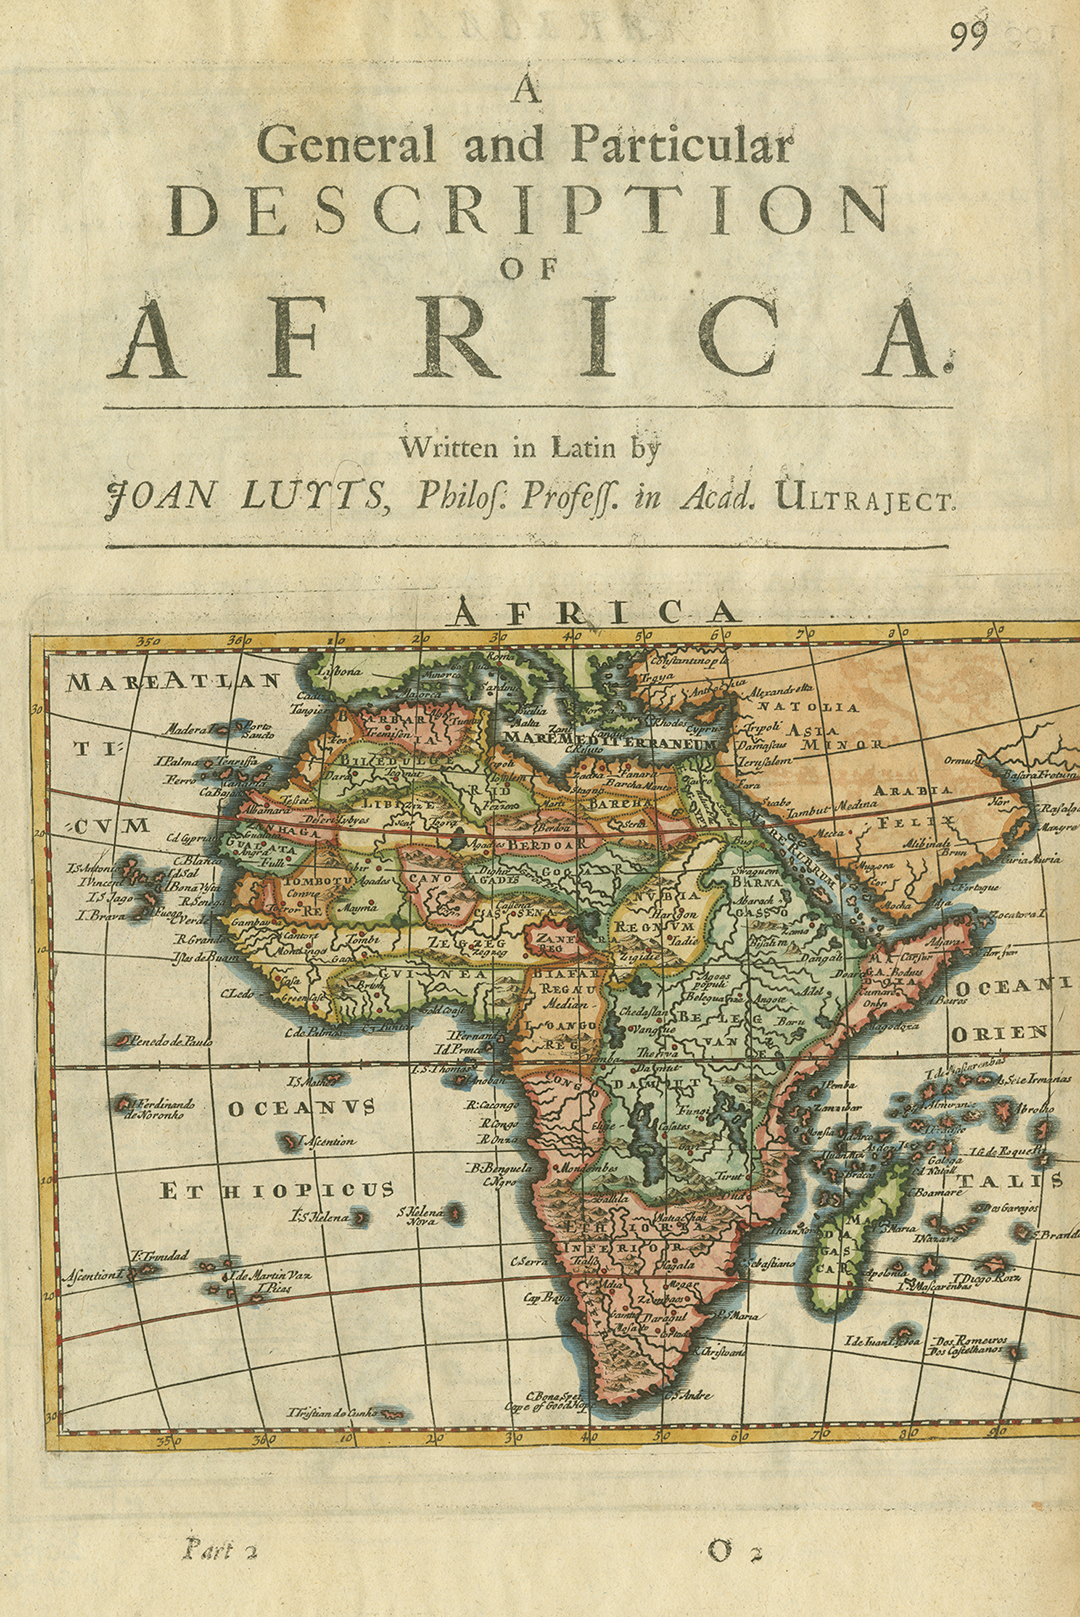 Cover page with map of Africa by Herman Moll from a particular section of Herman Moll's "A System of Geography: or, a New & Accurate Description of the Earth in all its Empires, Kingdoms and States," published in London by Moll in 1701. At top of sheet: "A General and Particular Description of Africa. Written in Latin by Joan Luyts, philos. Profess. in Acad. Ultraject." "Part 2 O2." On verso: "Barbary and Bildulgerid, A map of Zaara, Negroe-land, Guinea &c. /H. Moll fecit," with inset: